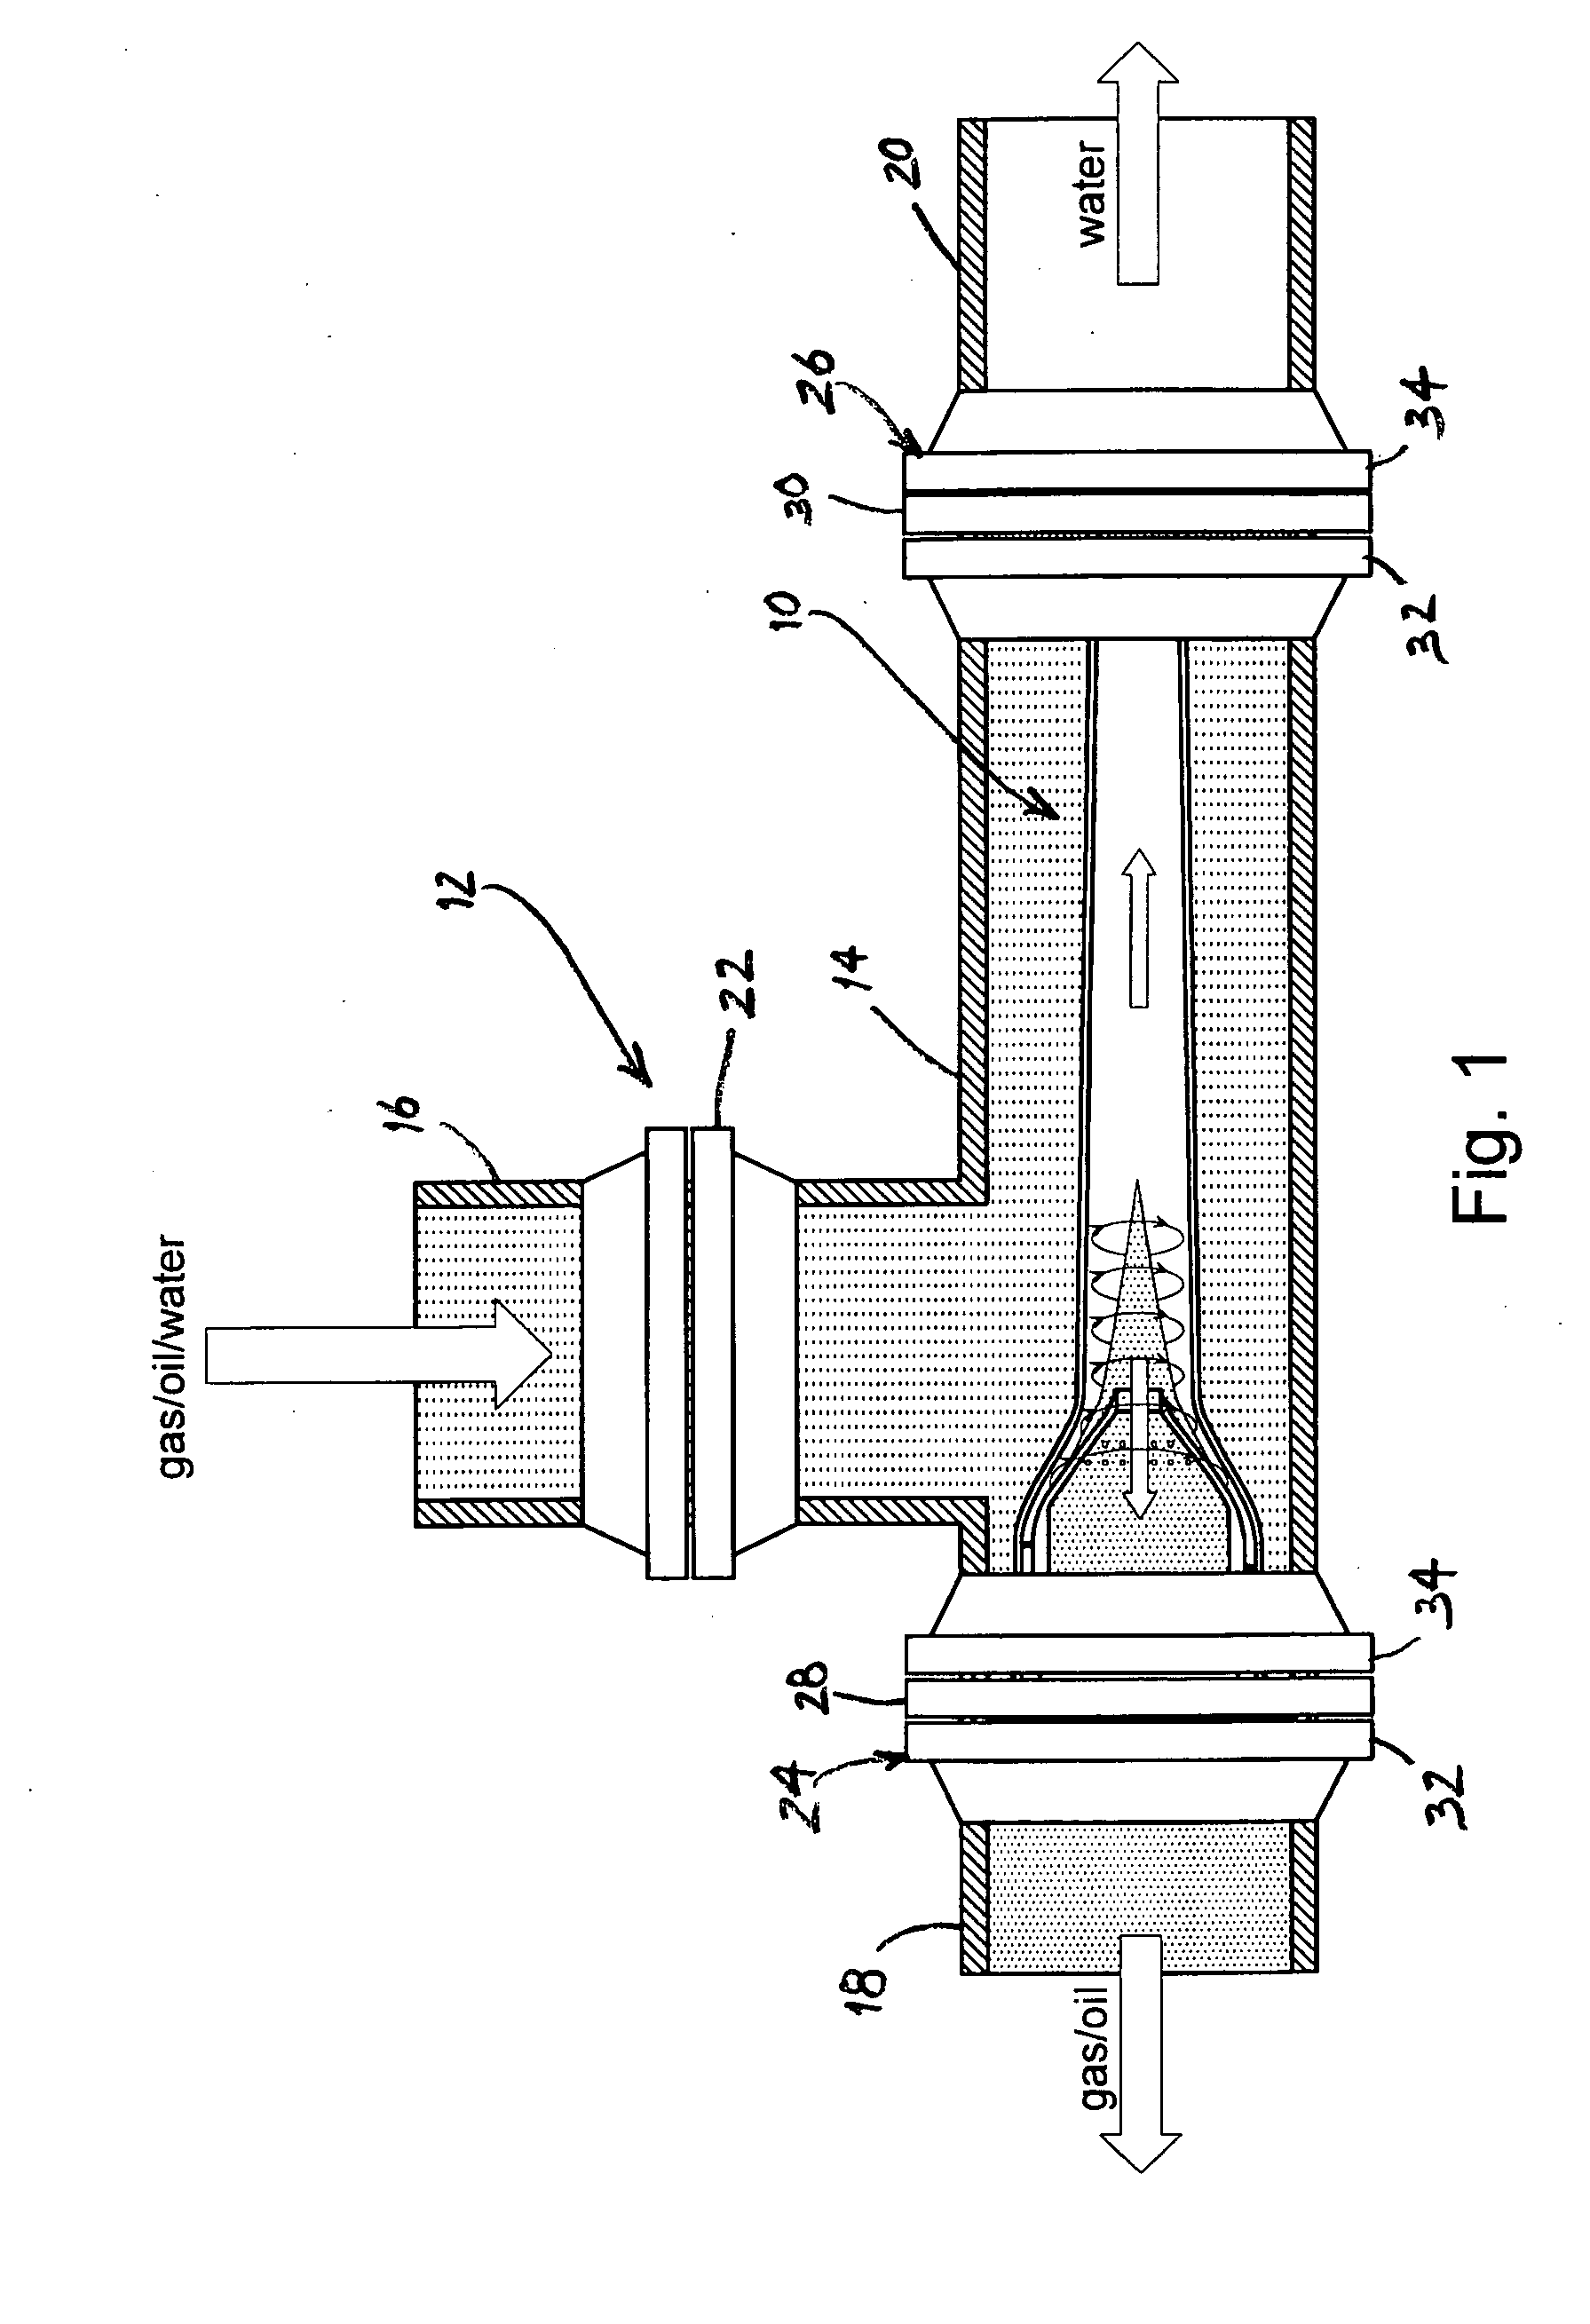 Cyclone separator for high gas volume fraction fluids